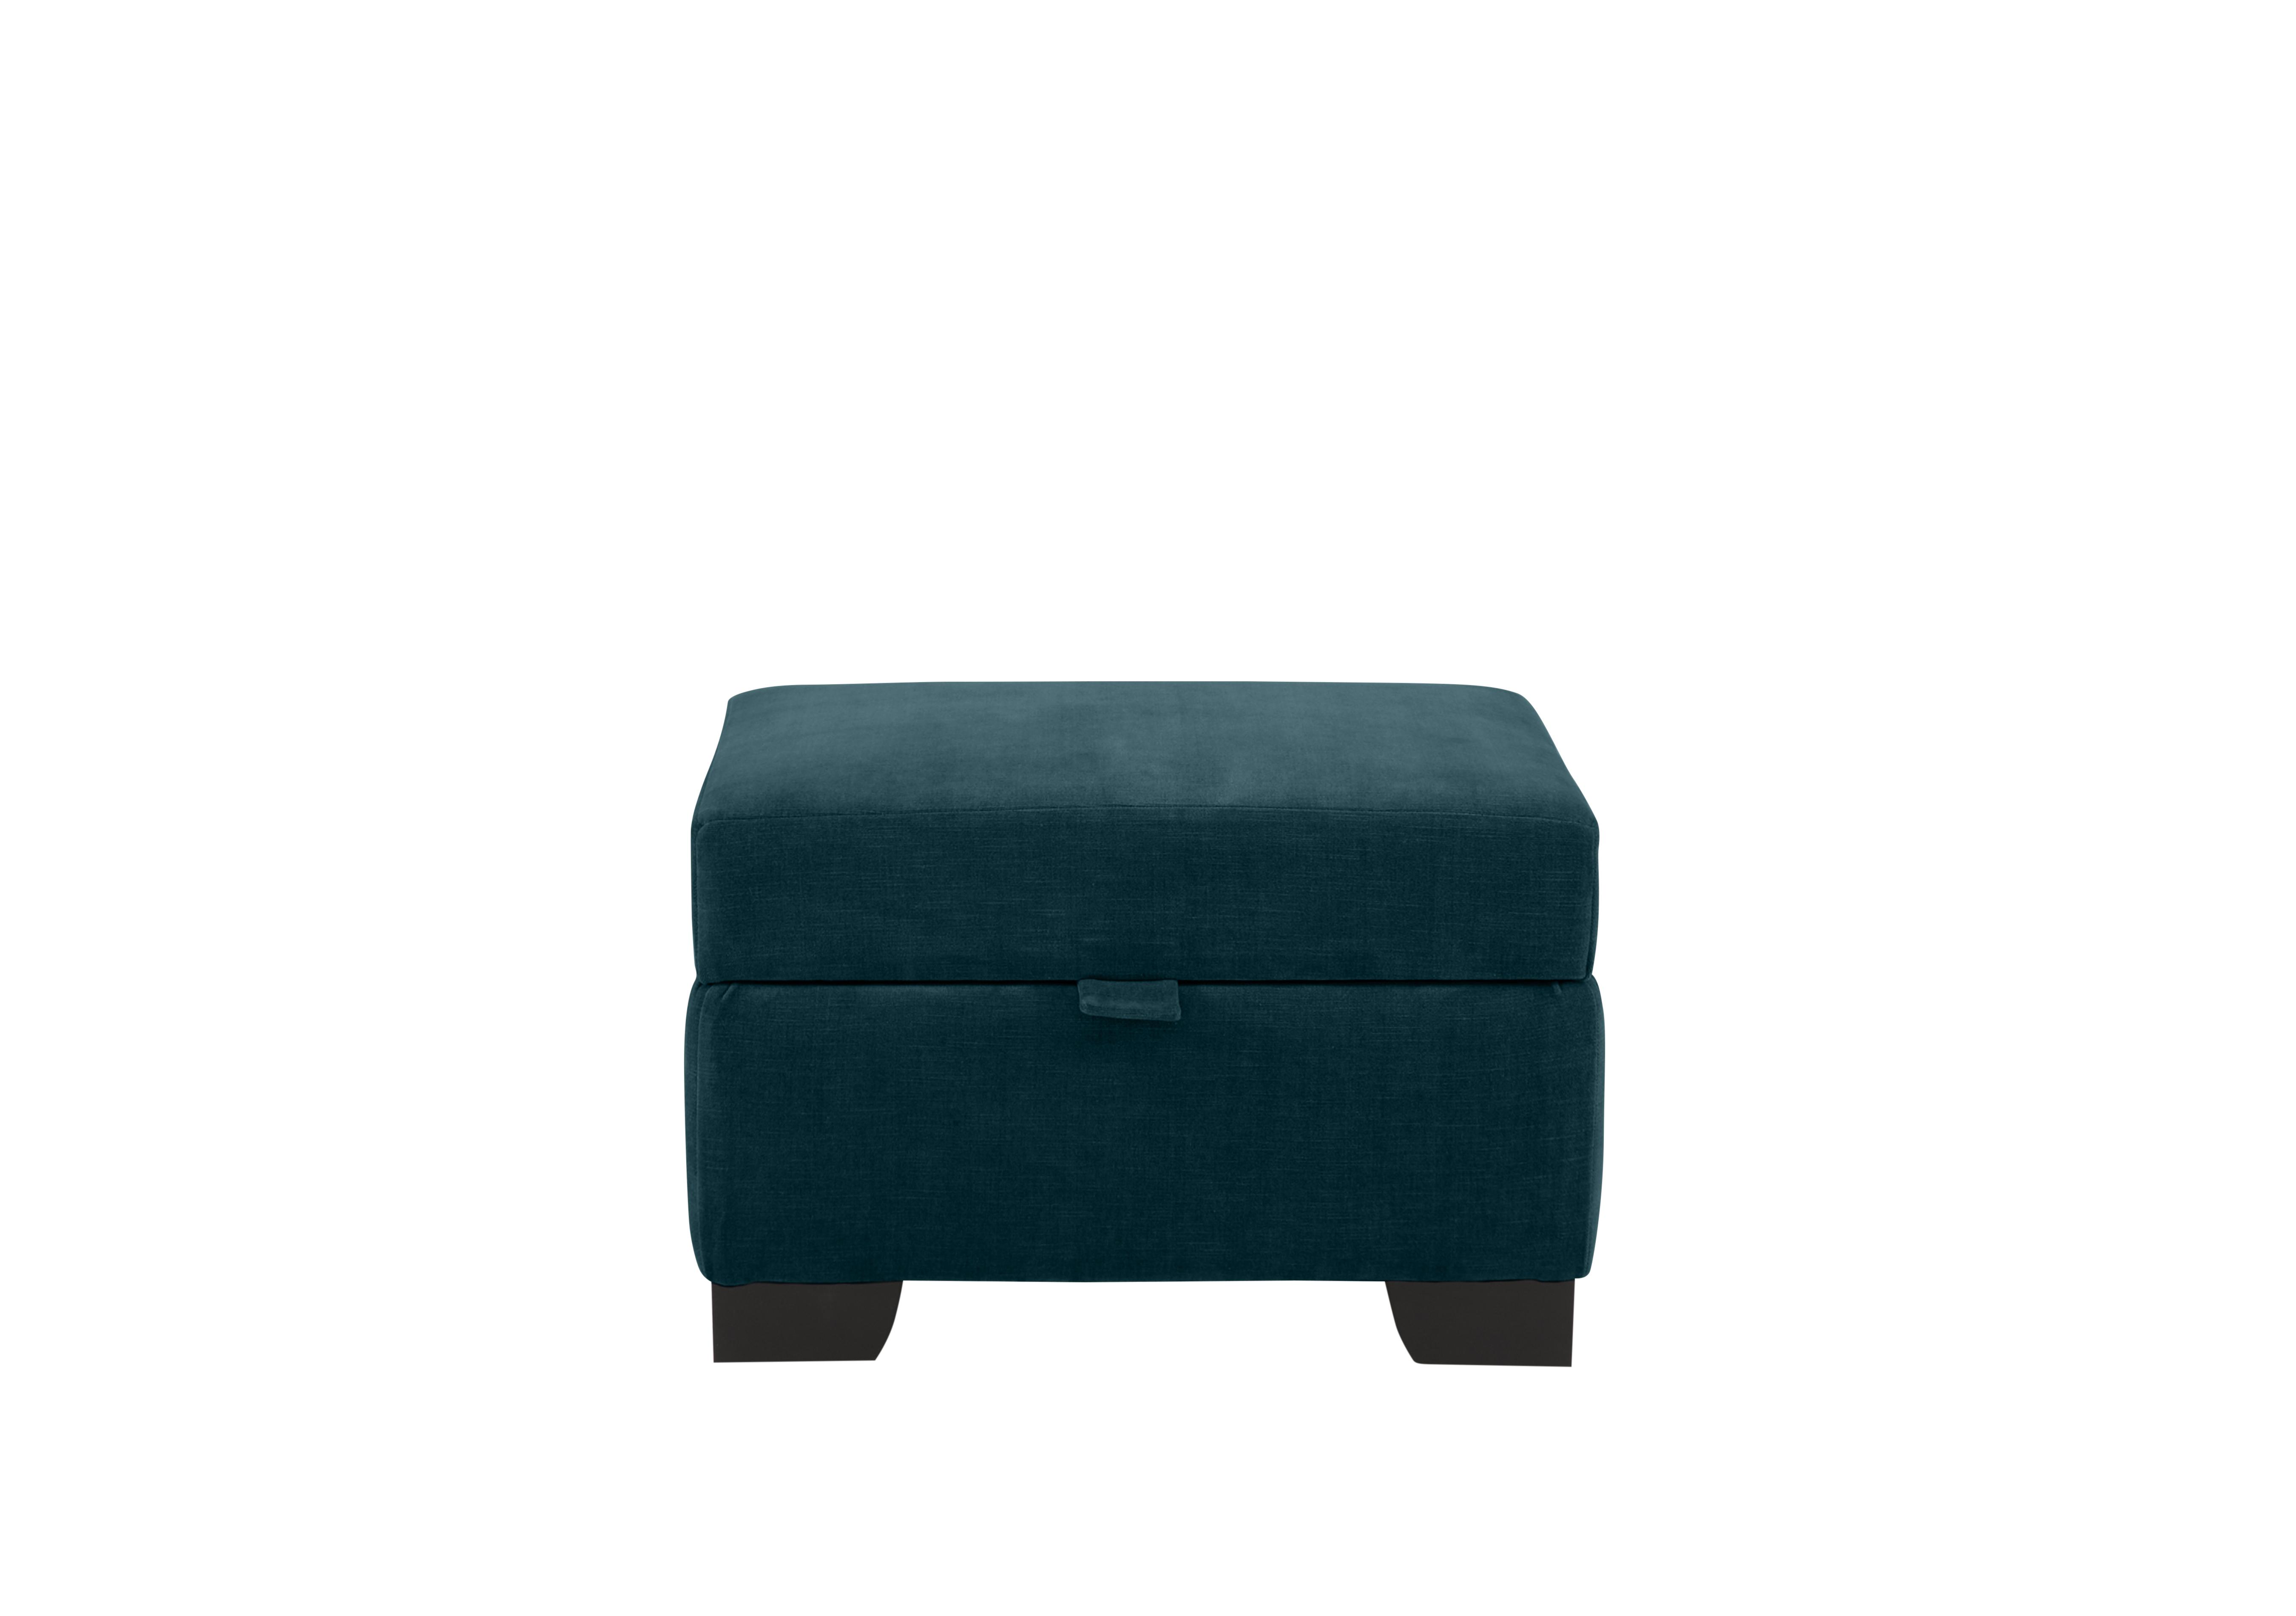 Sumptuous Fabric Storage Footstool in Chamonix Teal Dk on Furniture Village